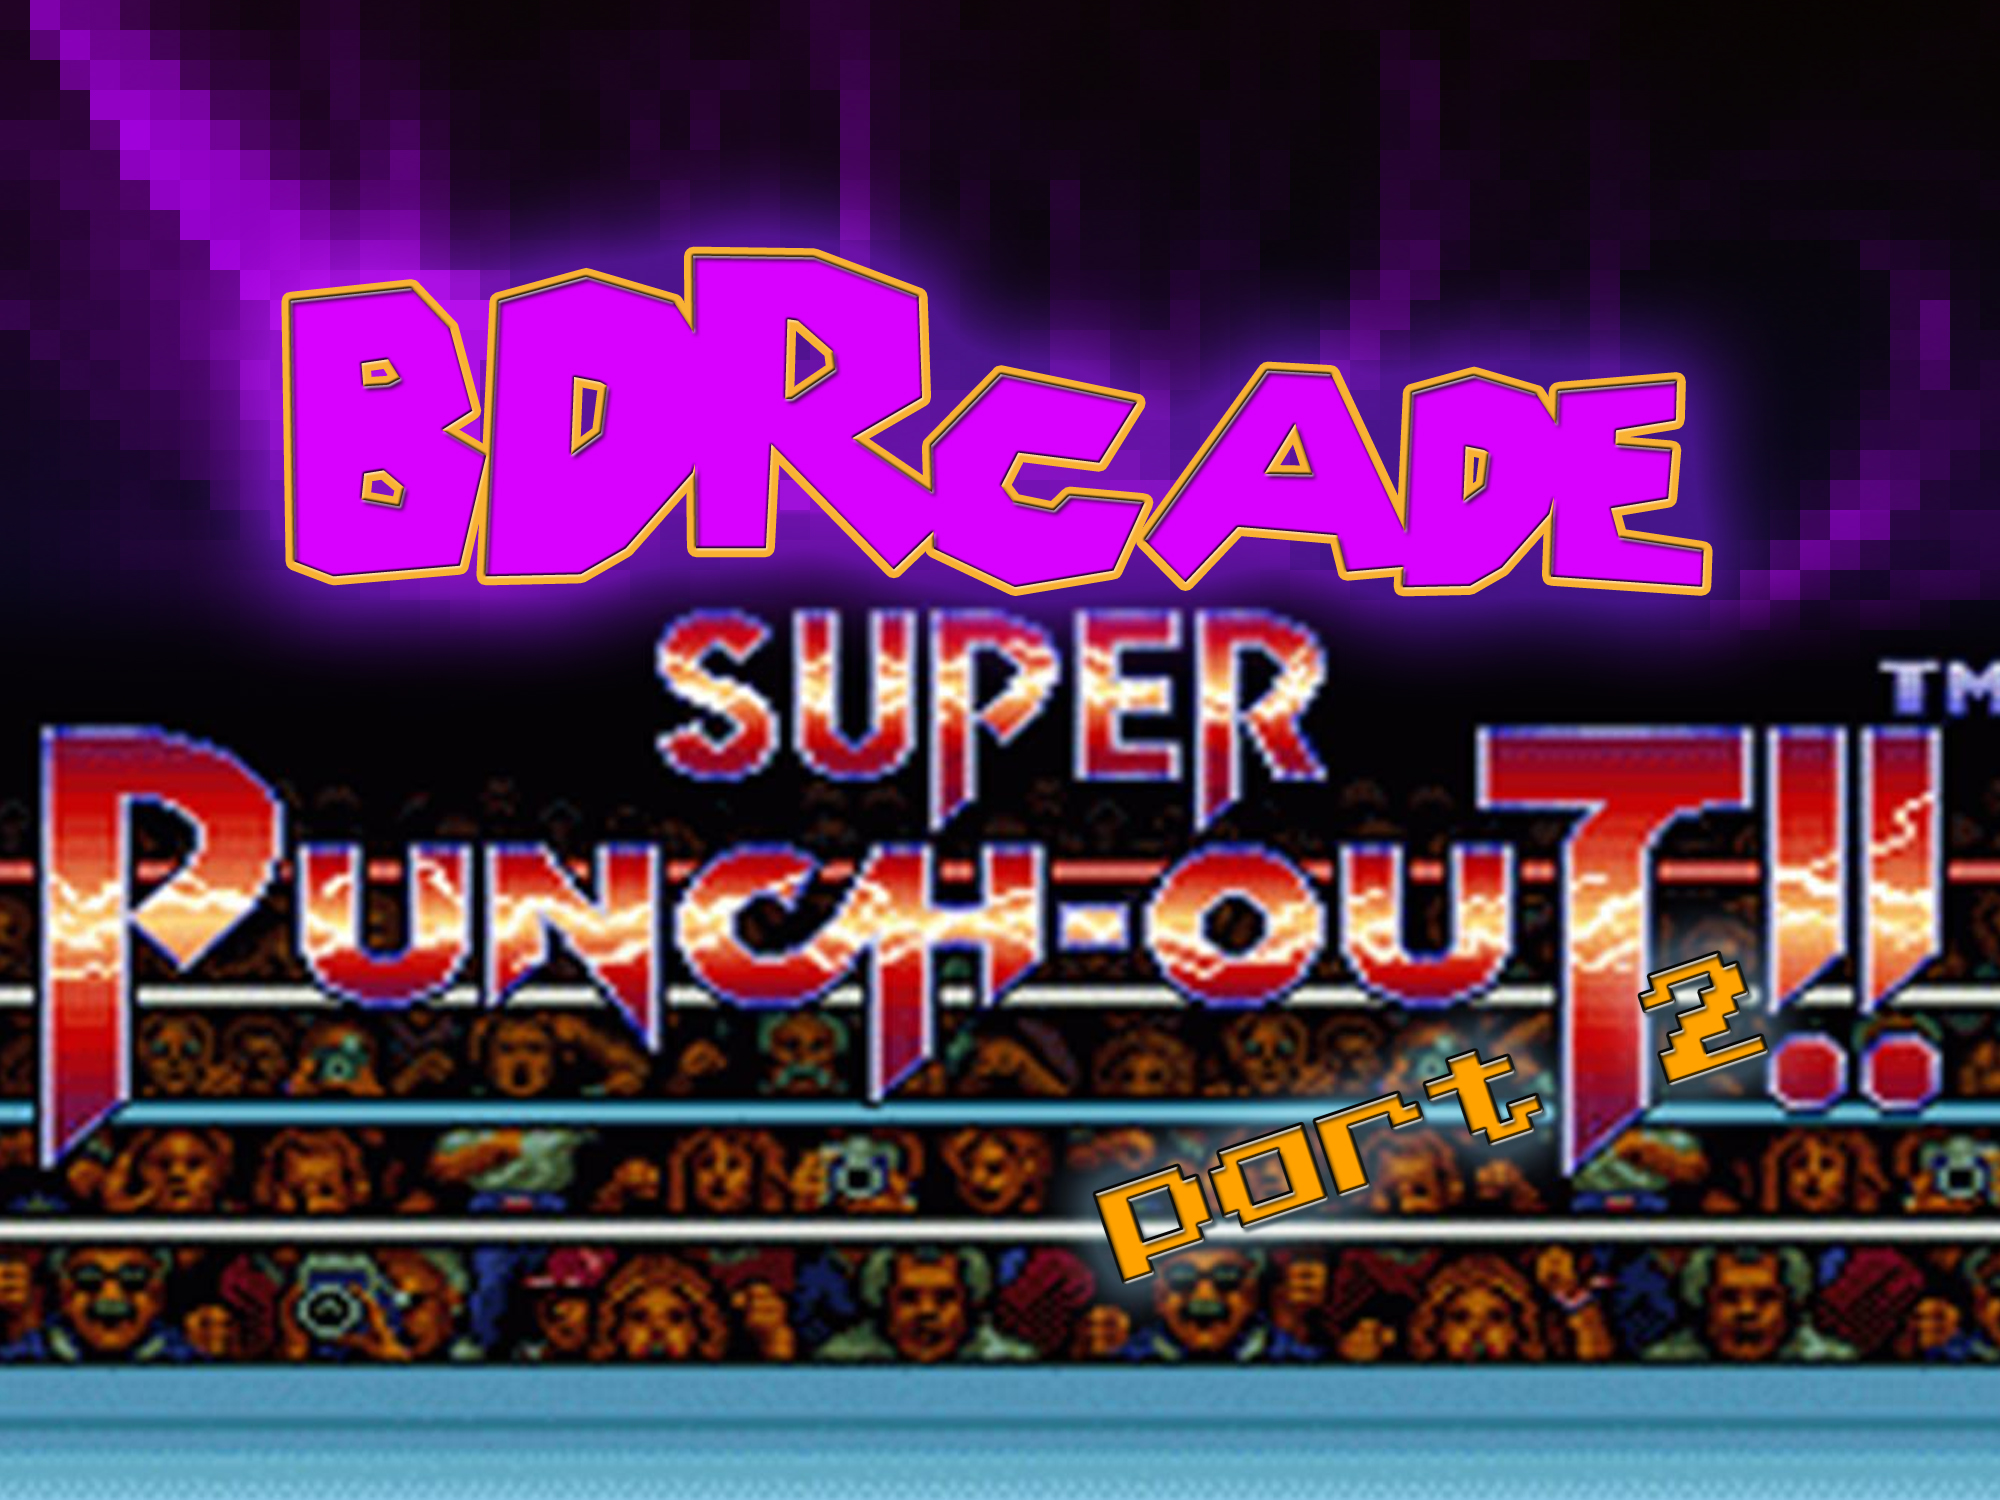 Super Punch-Out: Ess Him in the Ayy – PART 2 – BDRcade